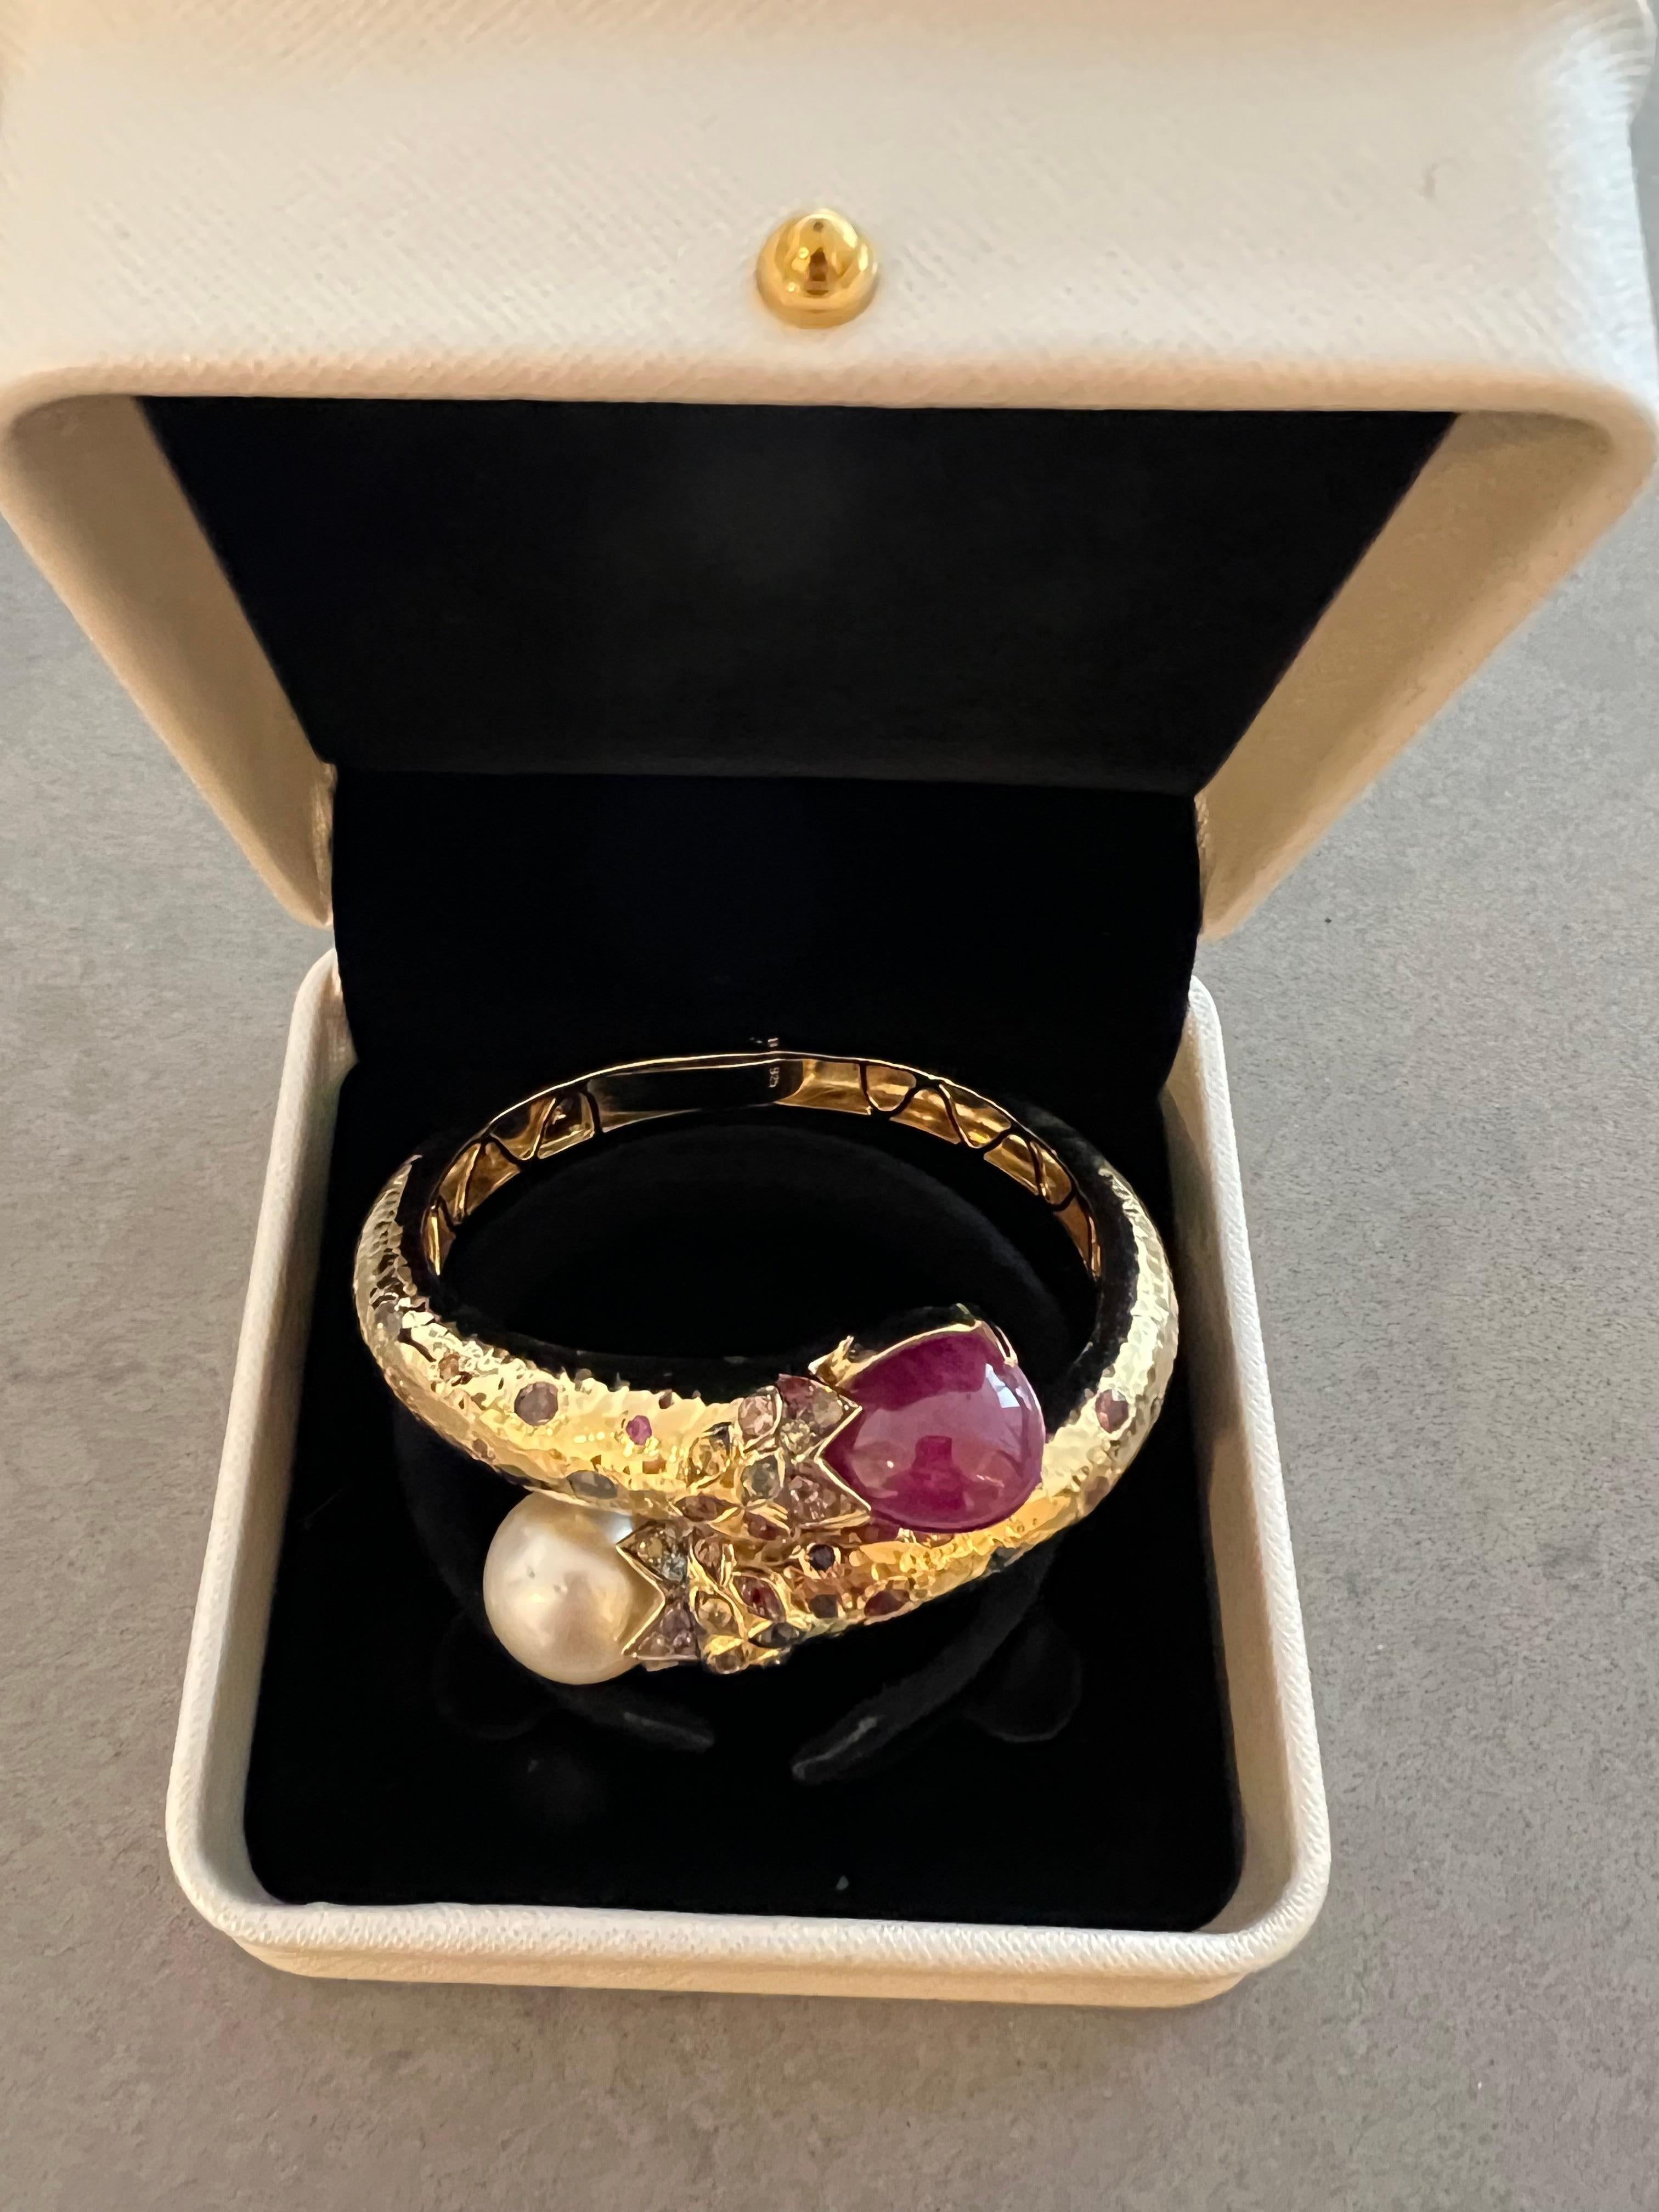 Women's Bochic “Orient” South Sea Pearl, Ruby & Sapphire Bangle Set In 18K Gold & Silver For Sale